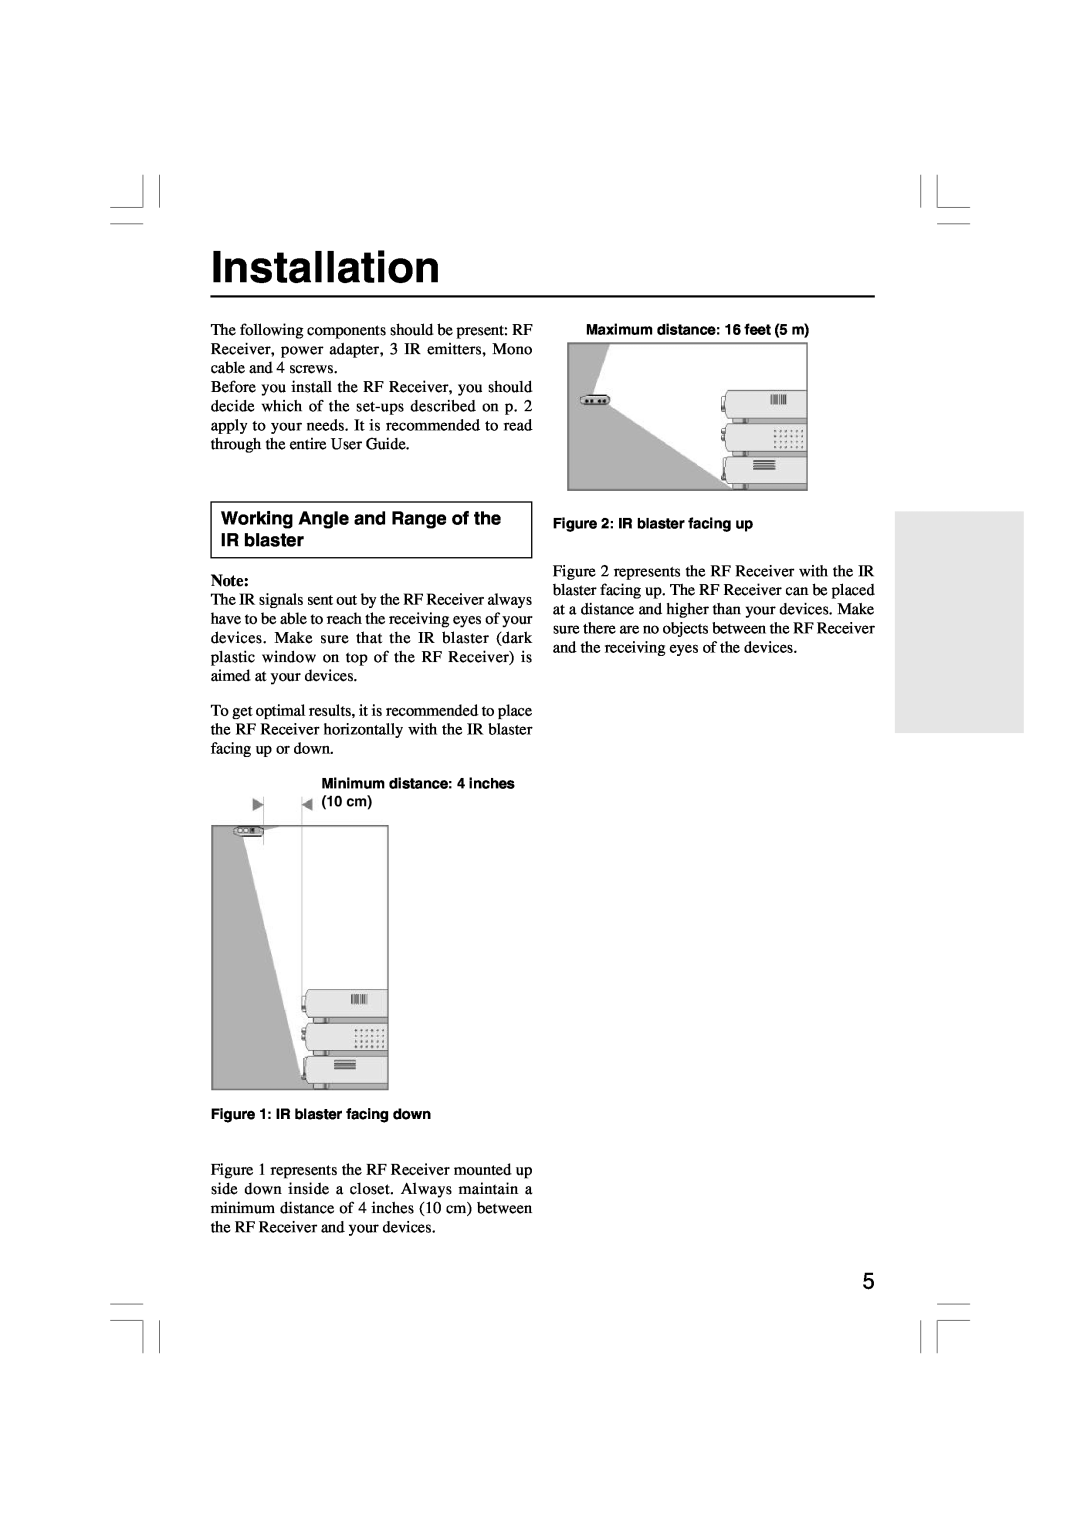 Onkyo RFR-5 instruction manual Installation, Working Angle and Range of the IR blaster 